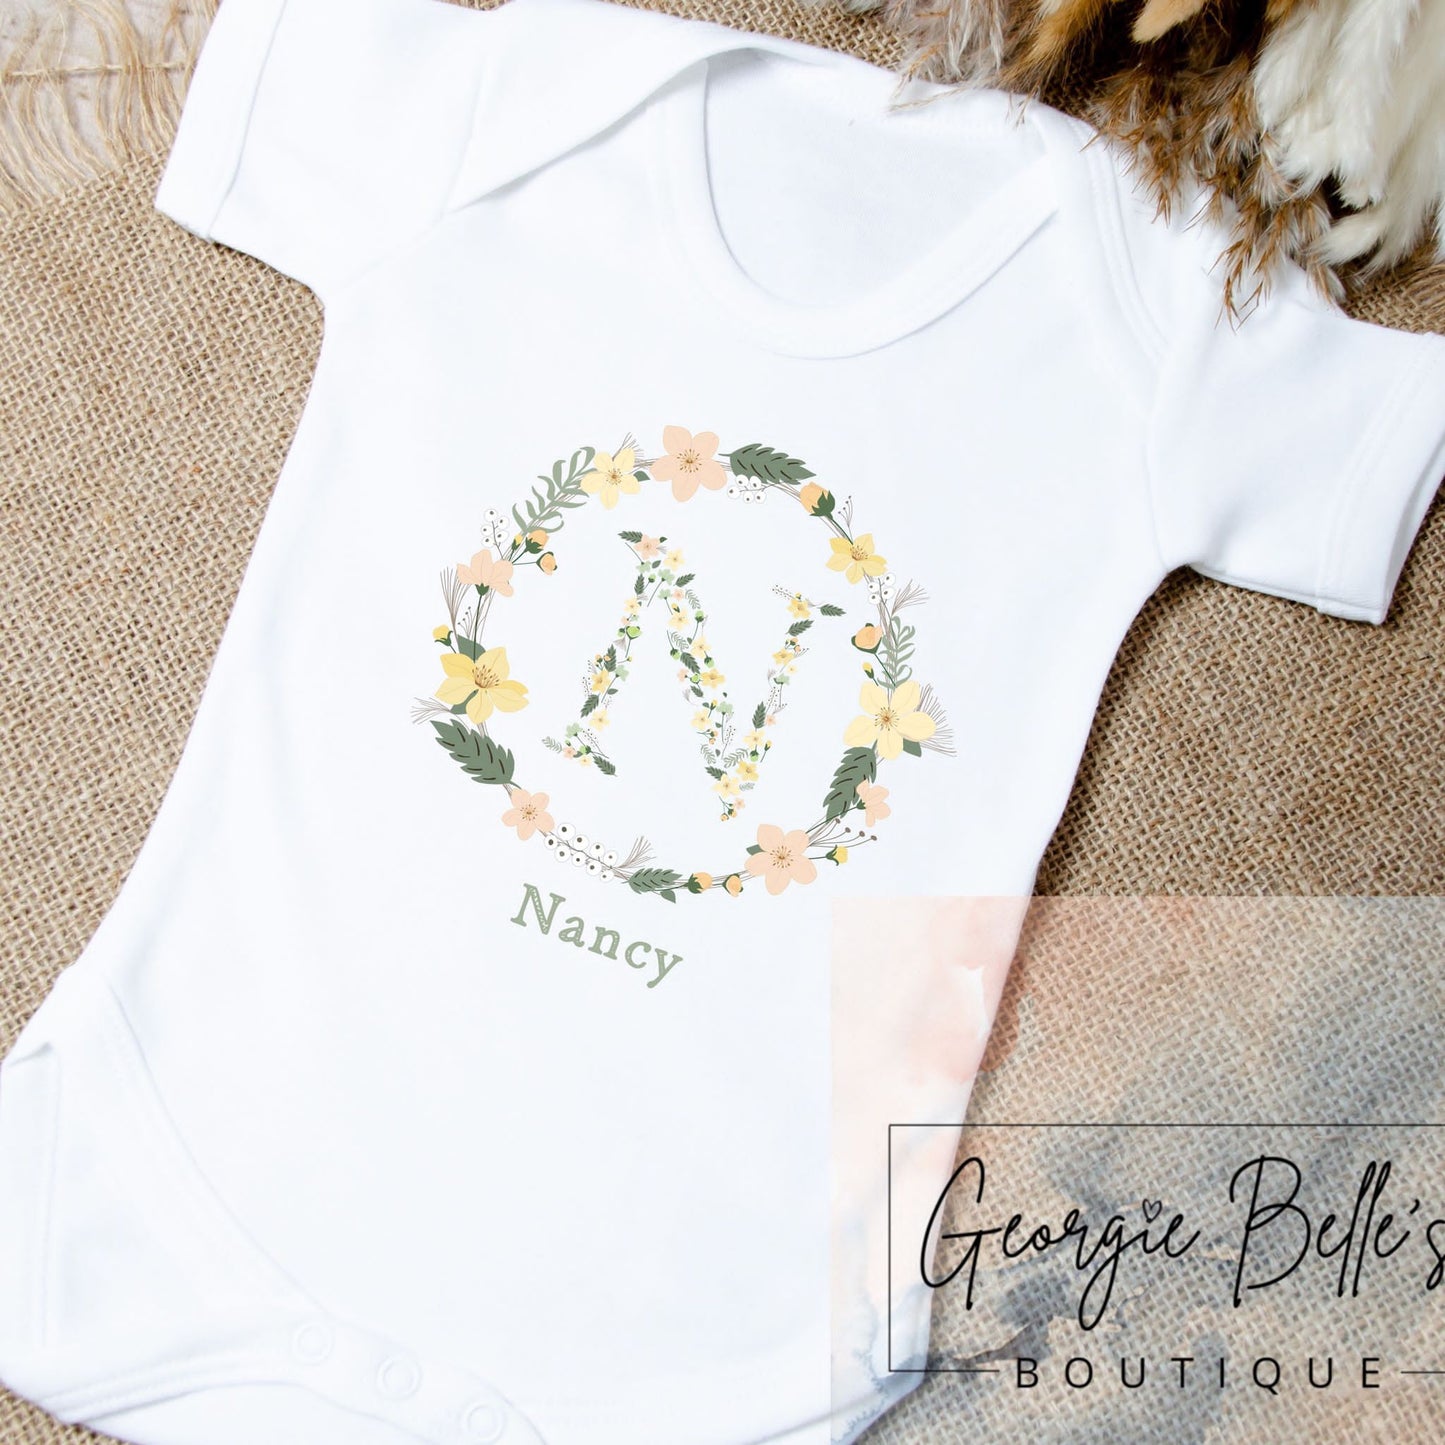 Personalised Vest/Babygrow - Yellow Floral Wreath Design